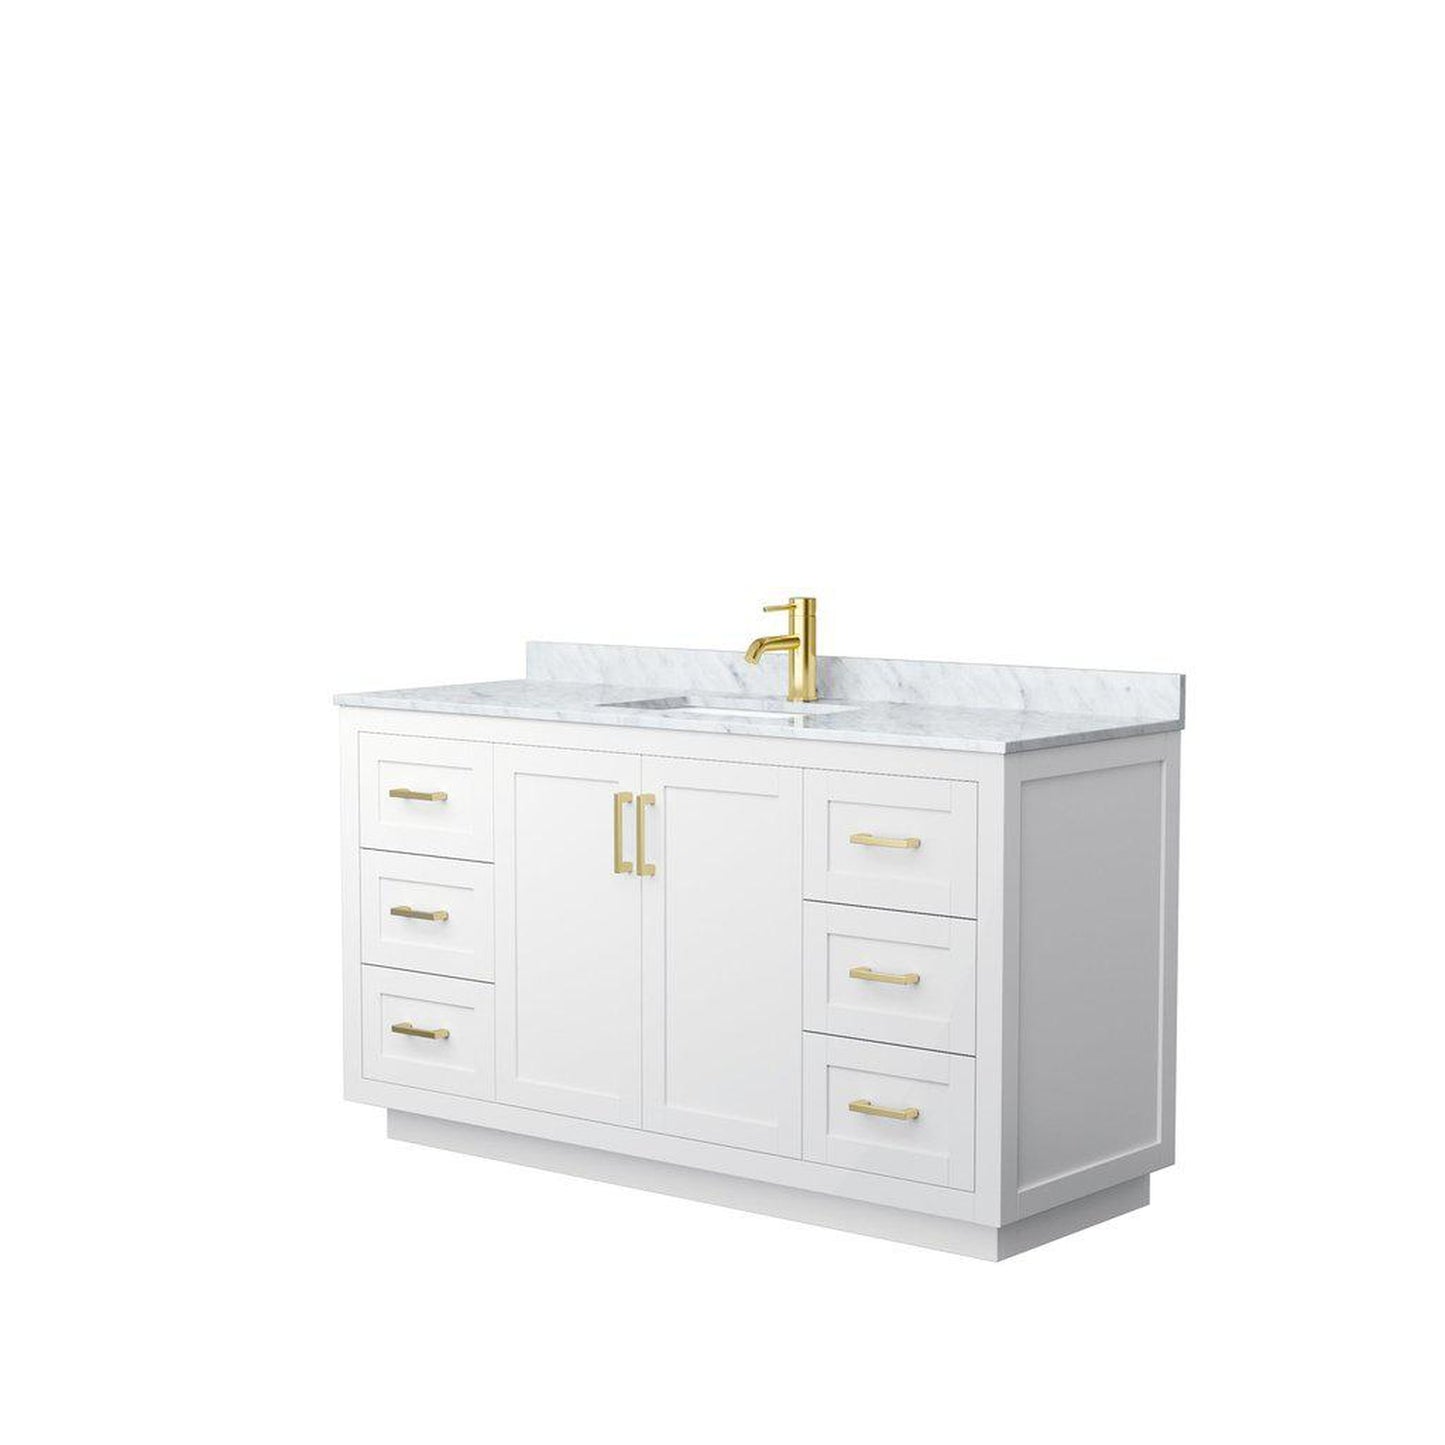 Wyndham Collection Miranda 60" Single Bathroom White Vanity Set With White Carrara Marble Countertop, Undermount Square Sink, And Brushed Gold Trim